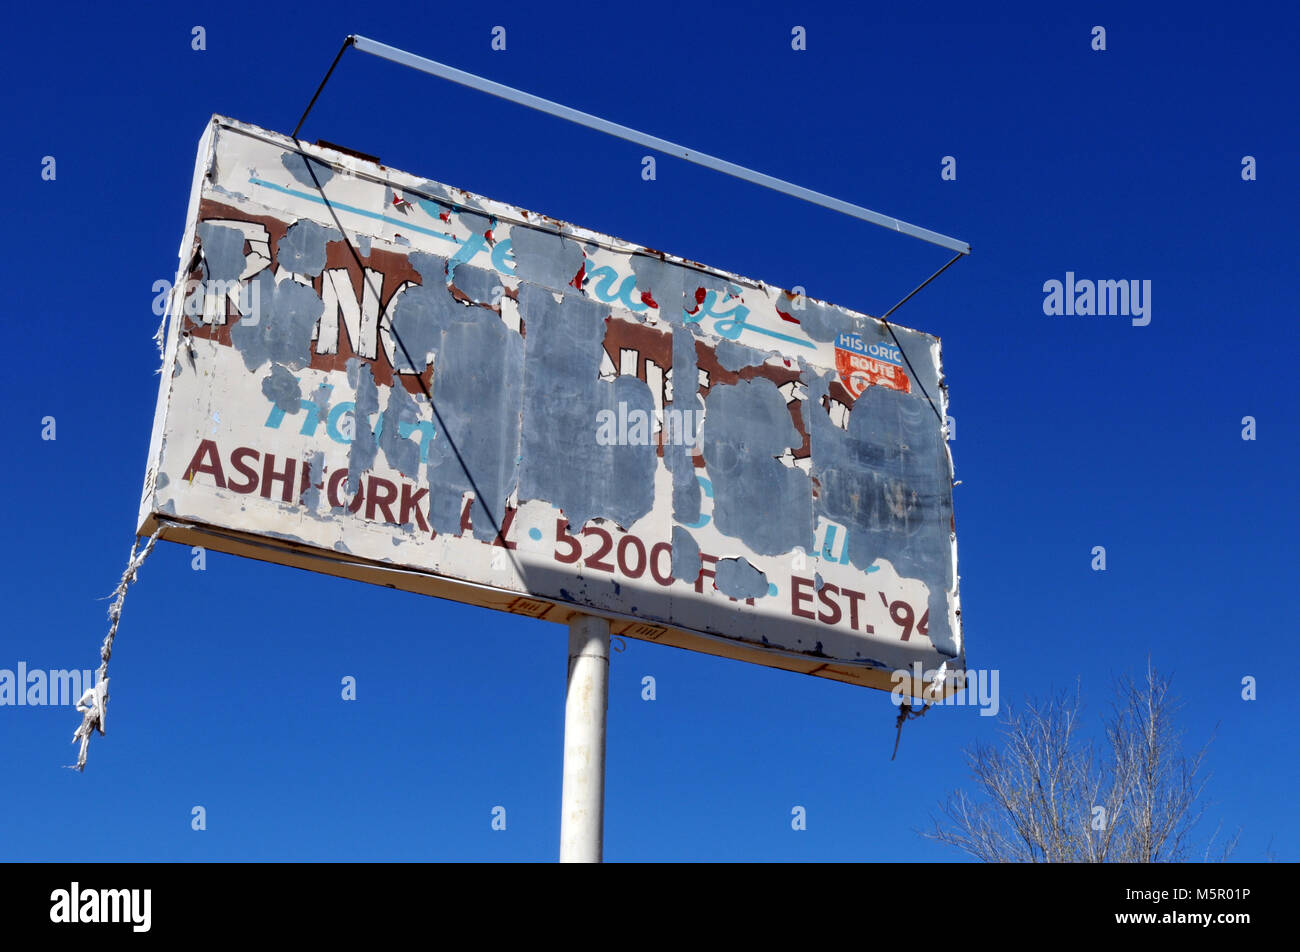 A tattered billboard stands in the Route 66 town of Ash Fork, Arizona against a bright blue sky. Stock Photo